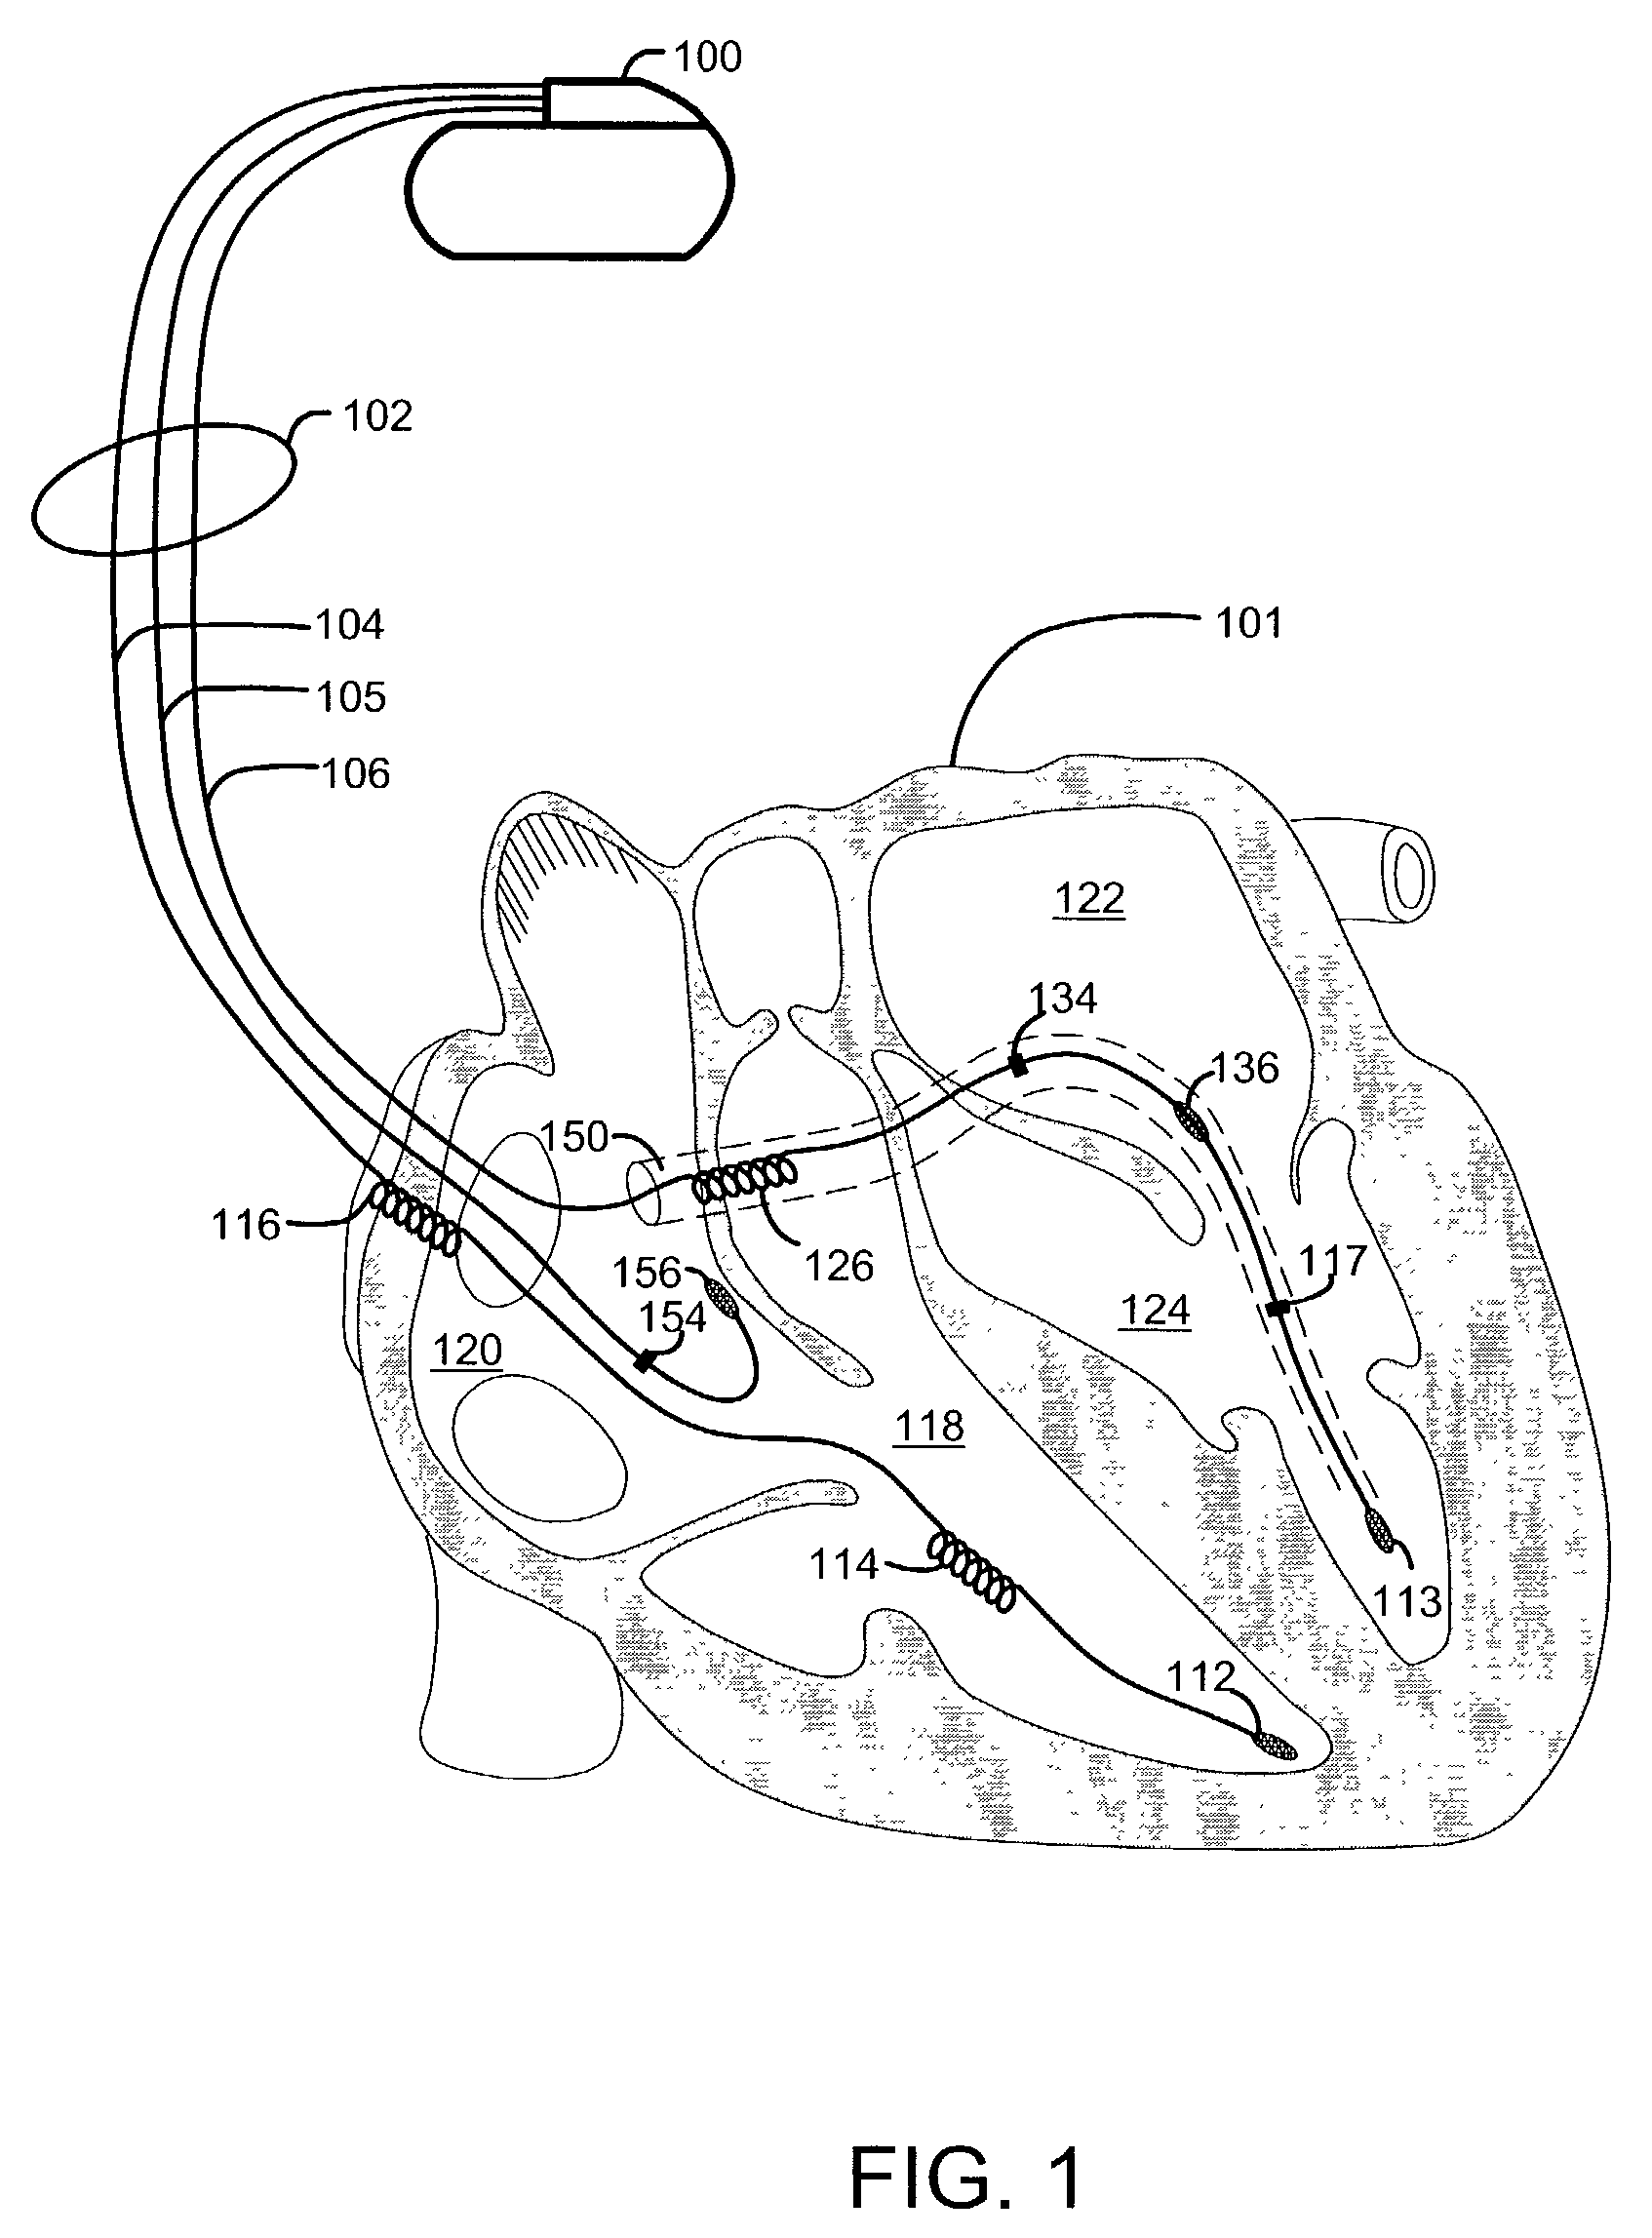 Method and system for detecting capture using a coronary vein electrode